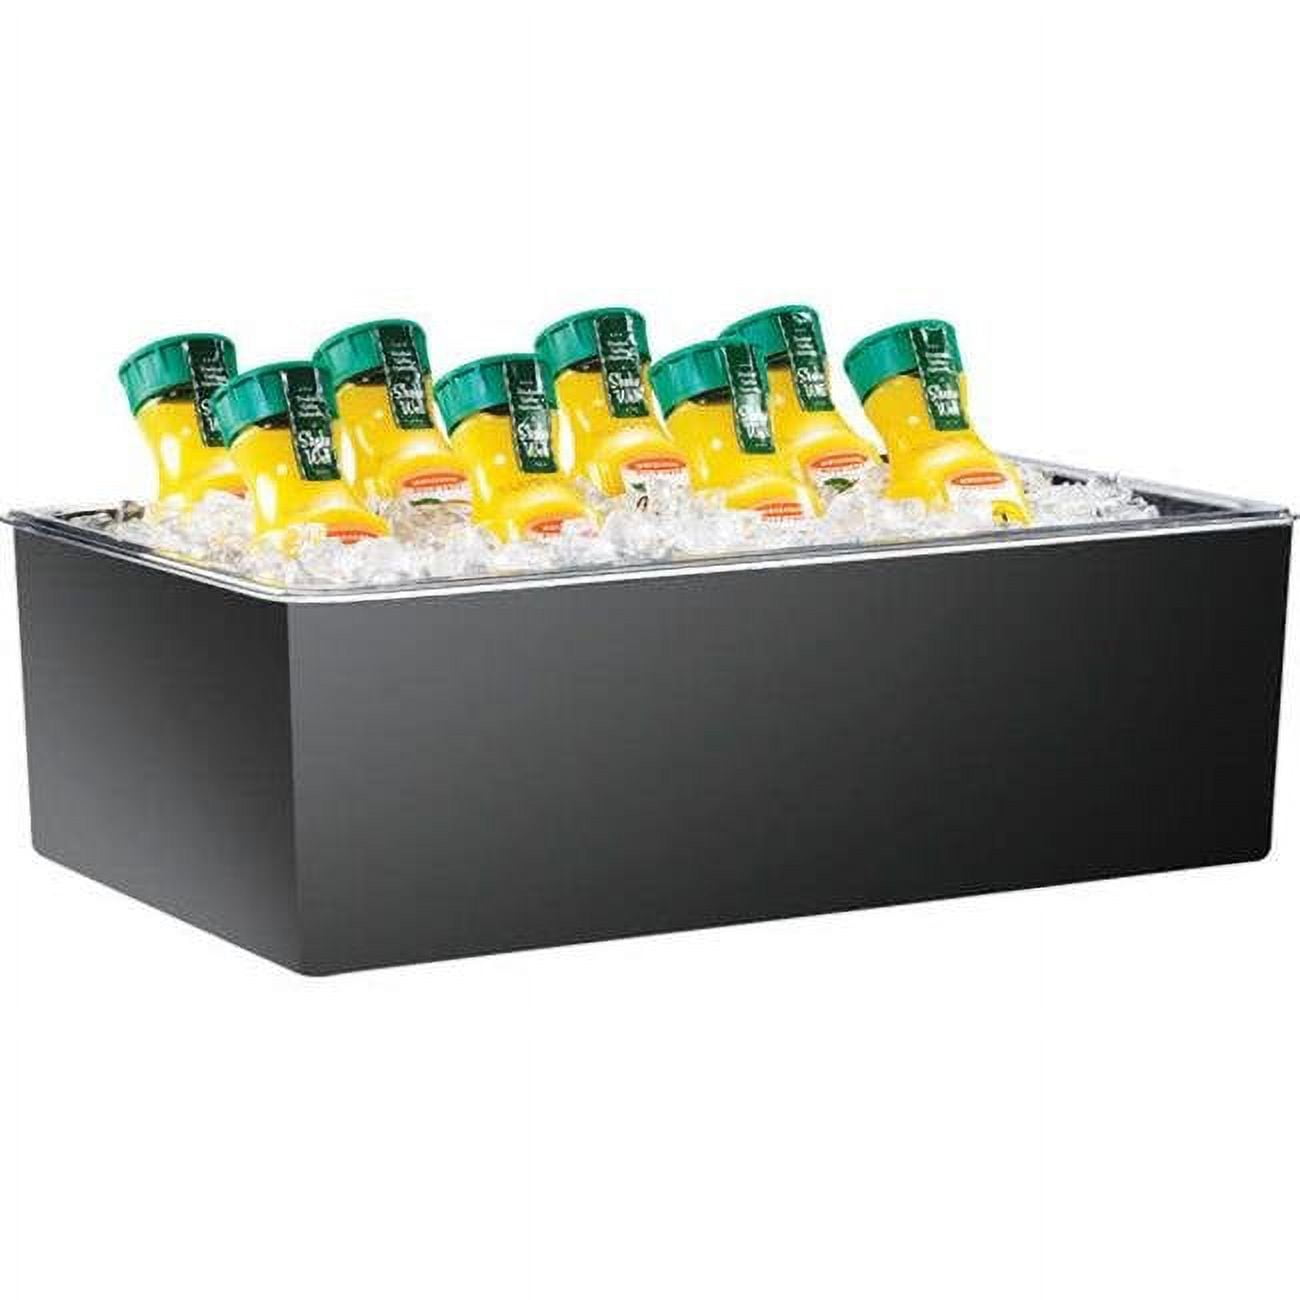 Picture of Cal Mil 475-12-13 Black Melamine Ice Housing with Clear Pan - 12 x 20 x 7 in.